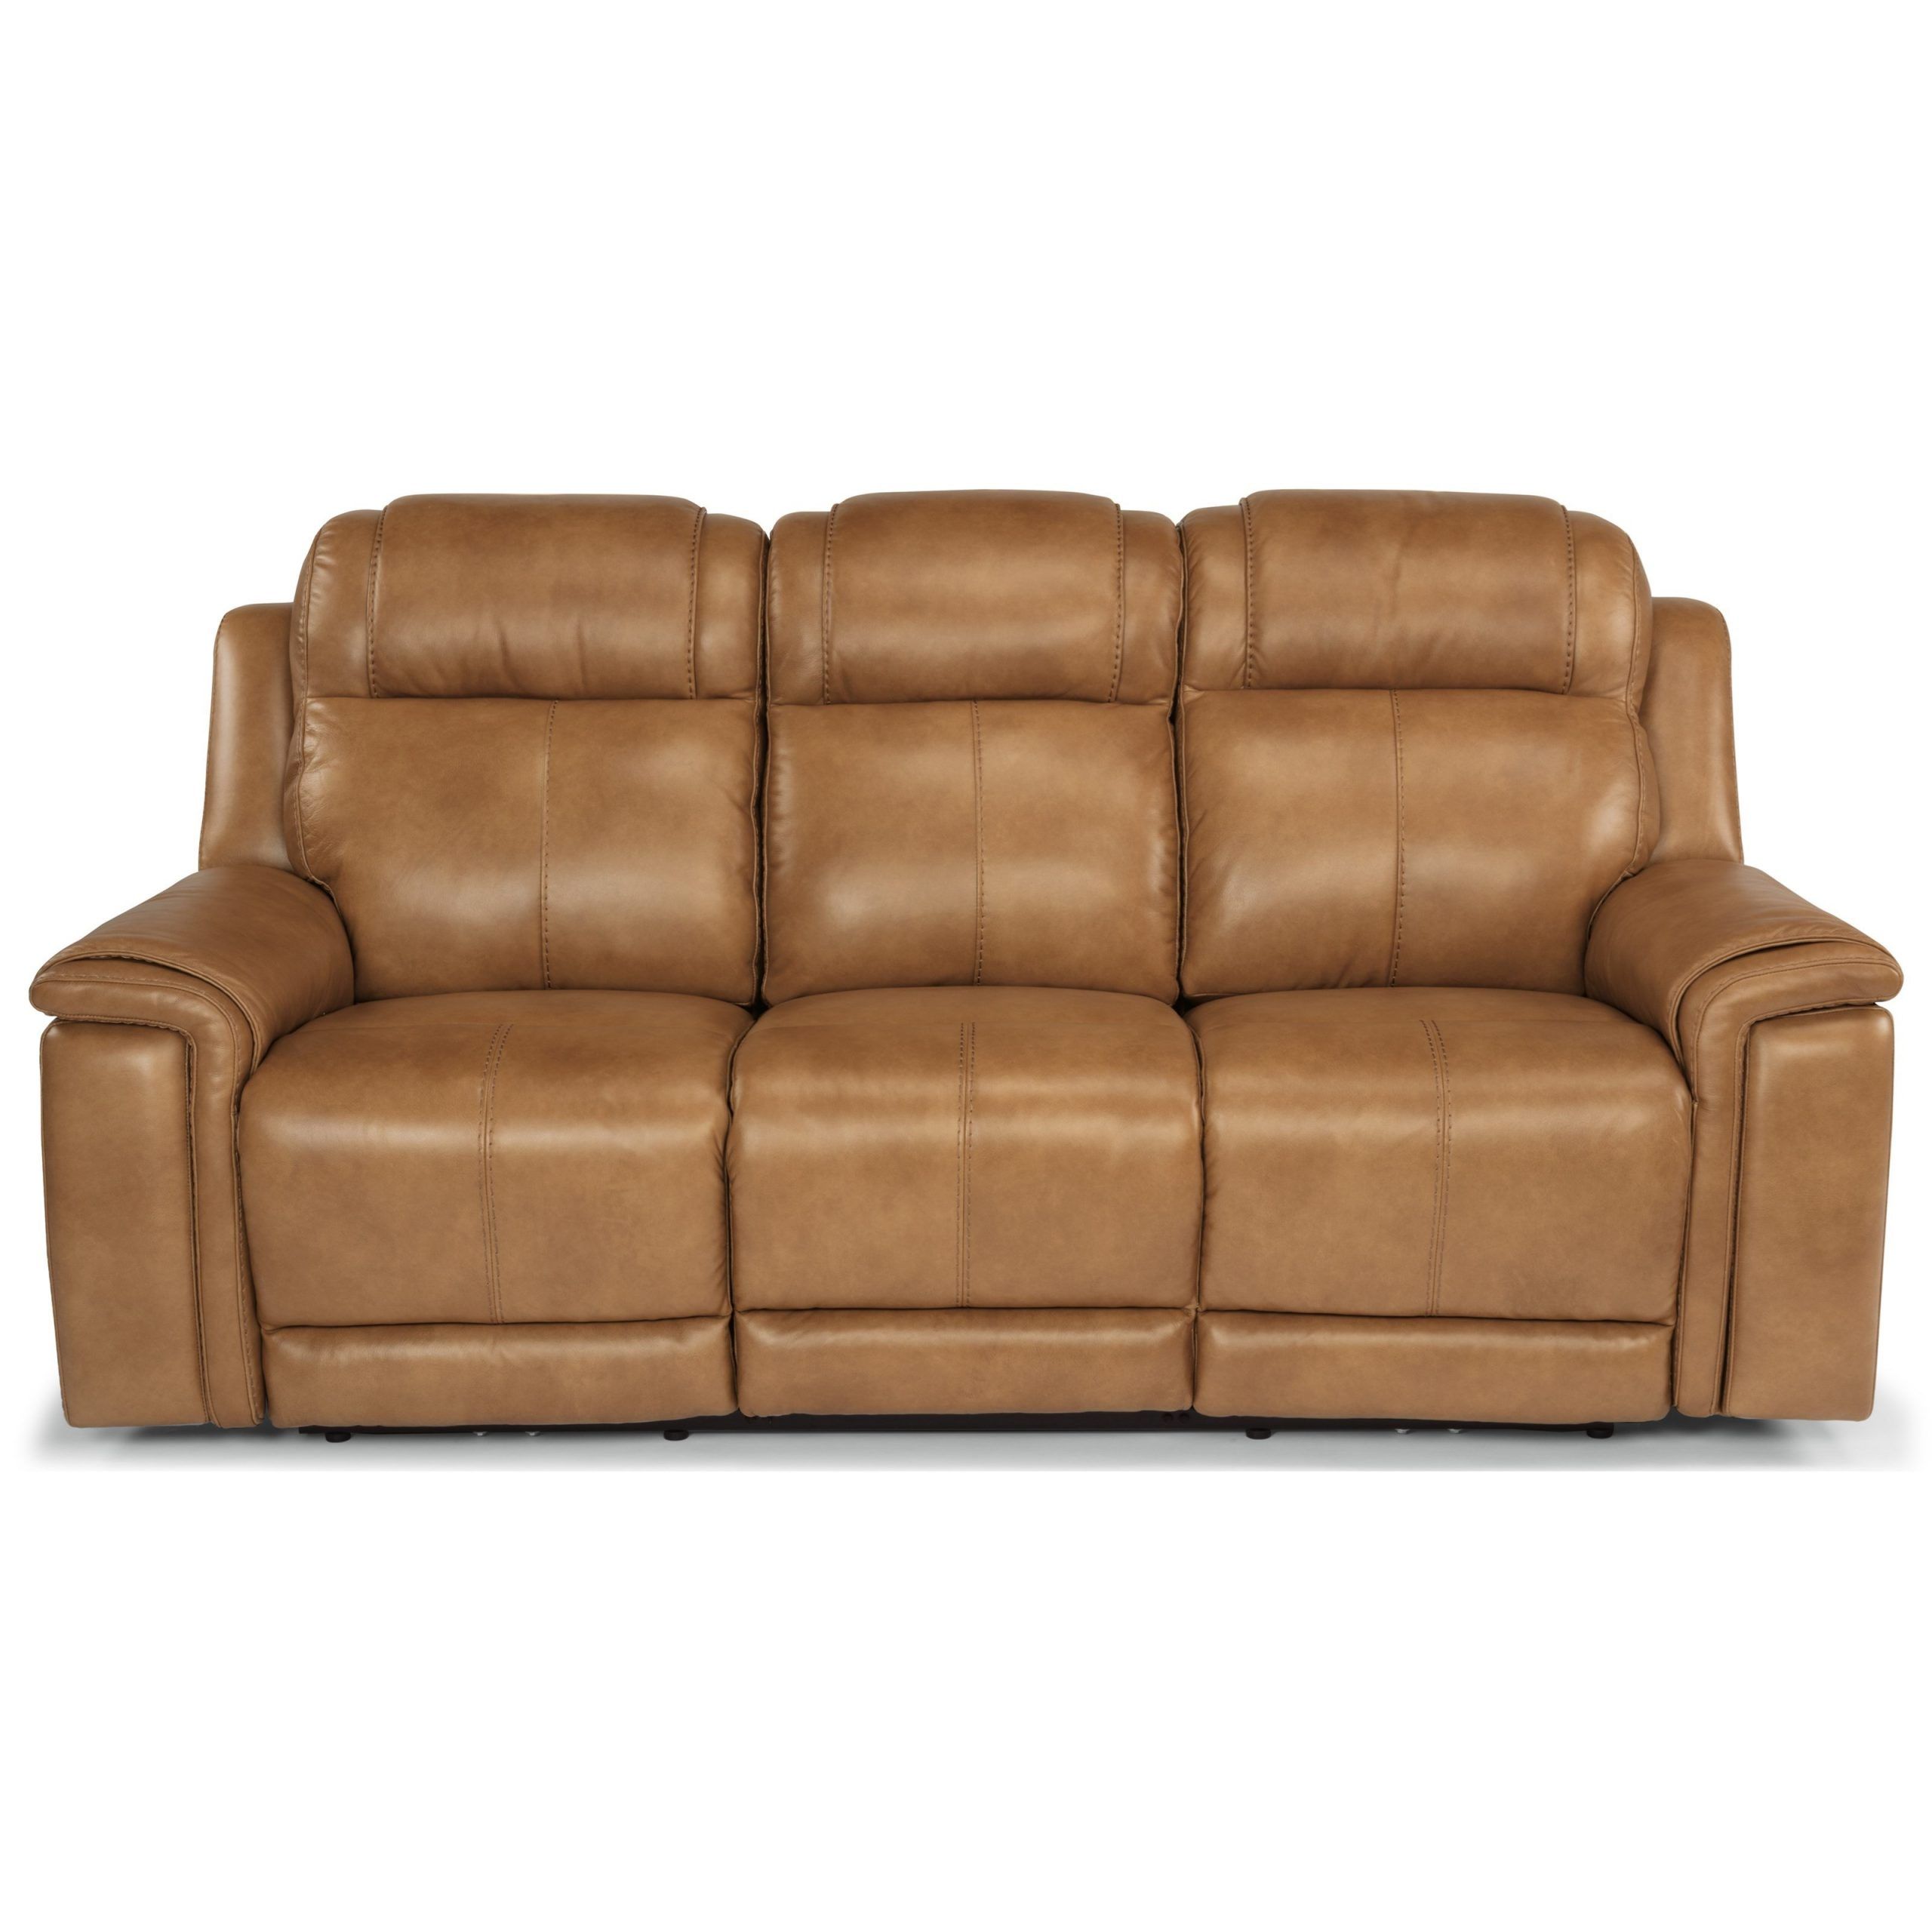 Flexsteel Latitudes – Kingsley Casual Lay Flat Power Intended For Power Reclining Sofas (View 2 of 15)